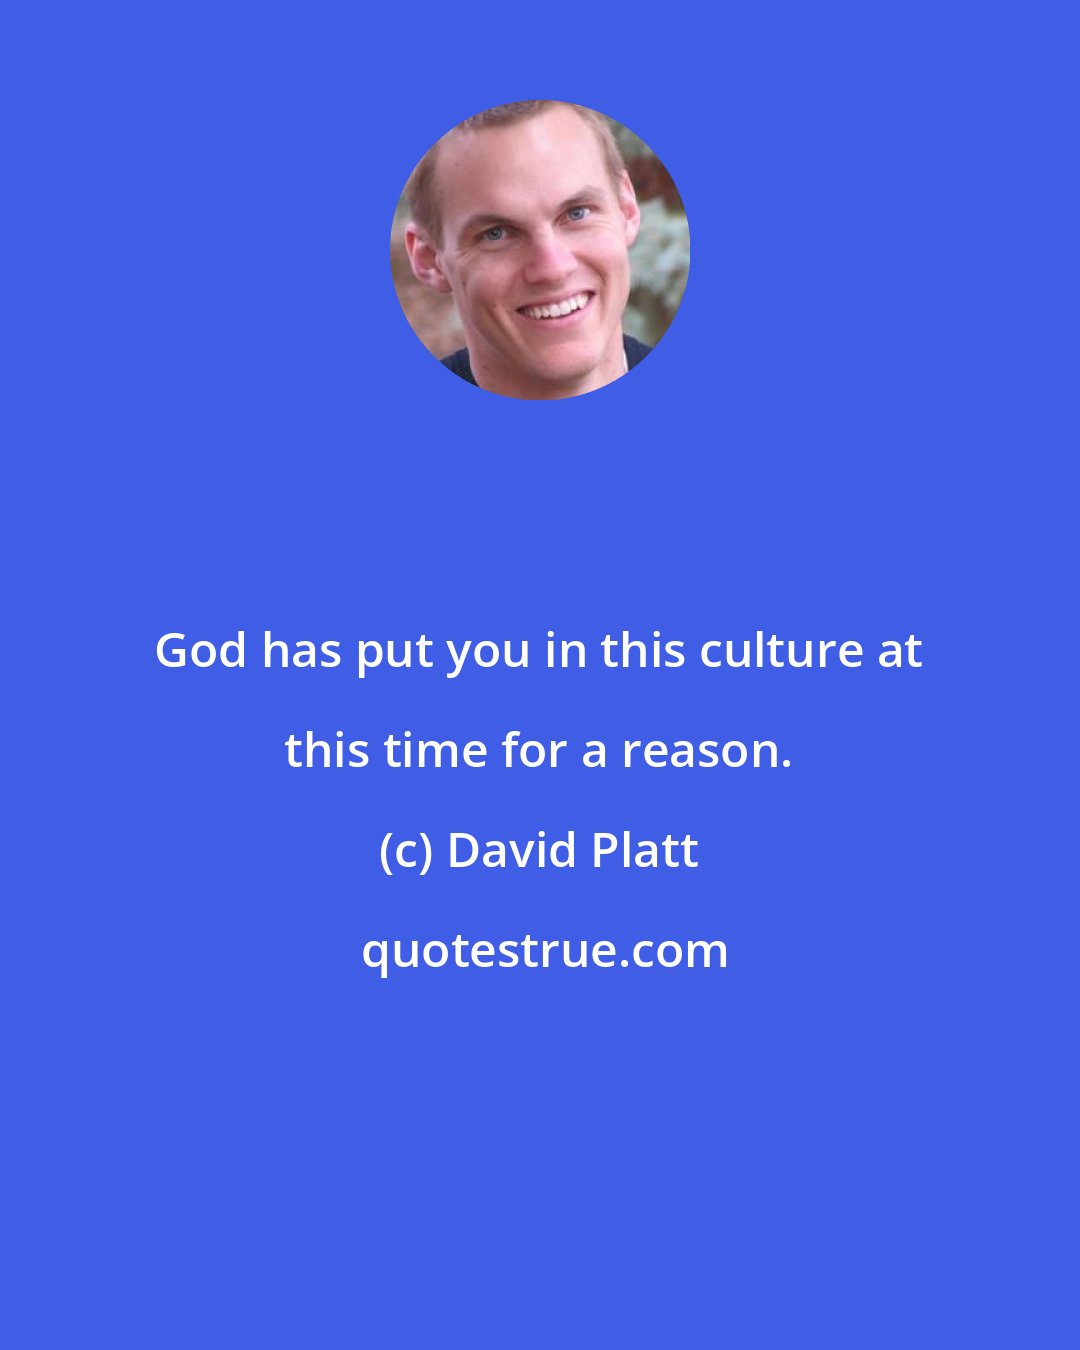 David Platt: God has put you in this culture at this time for a reason.